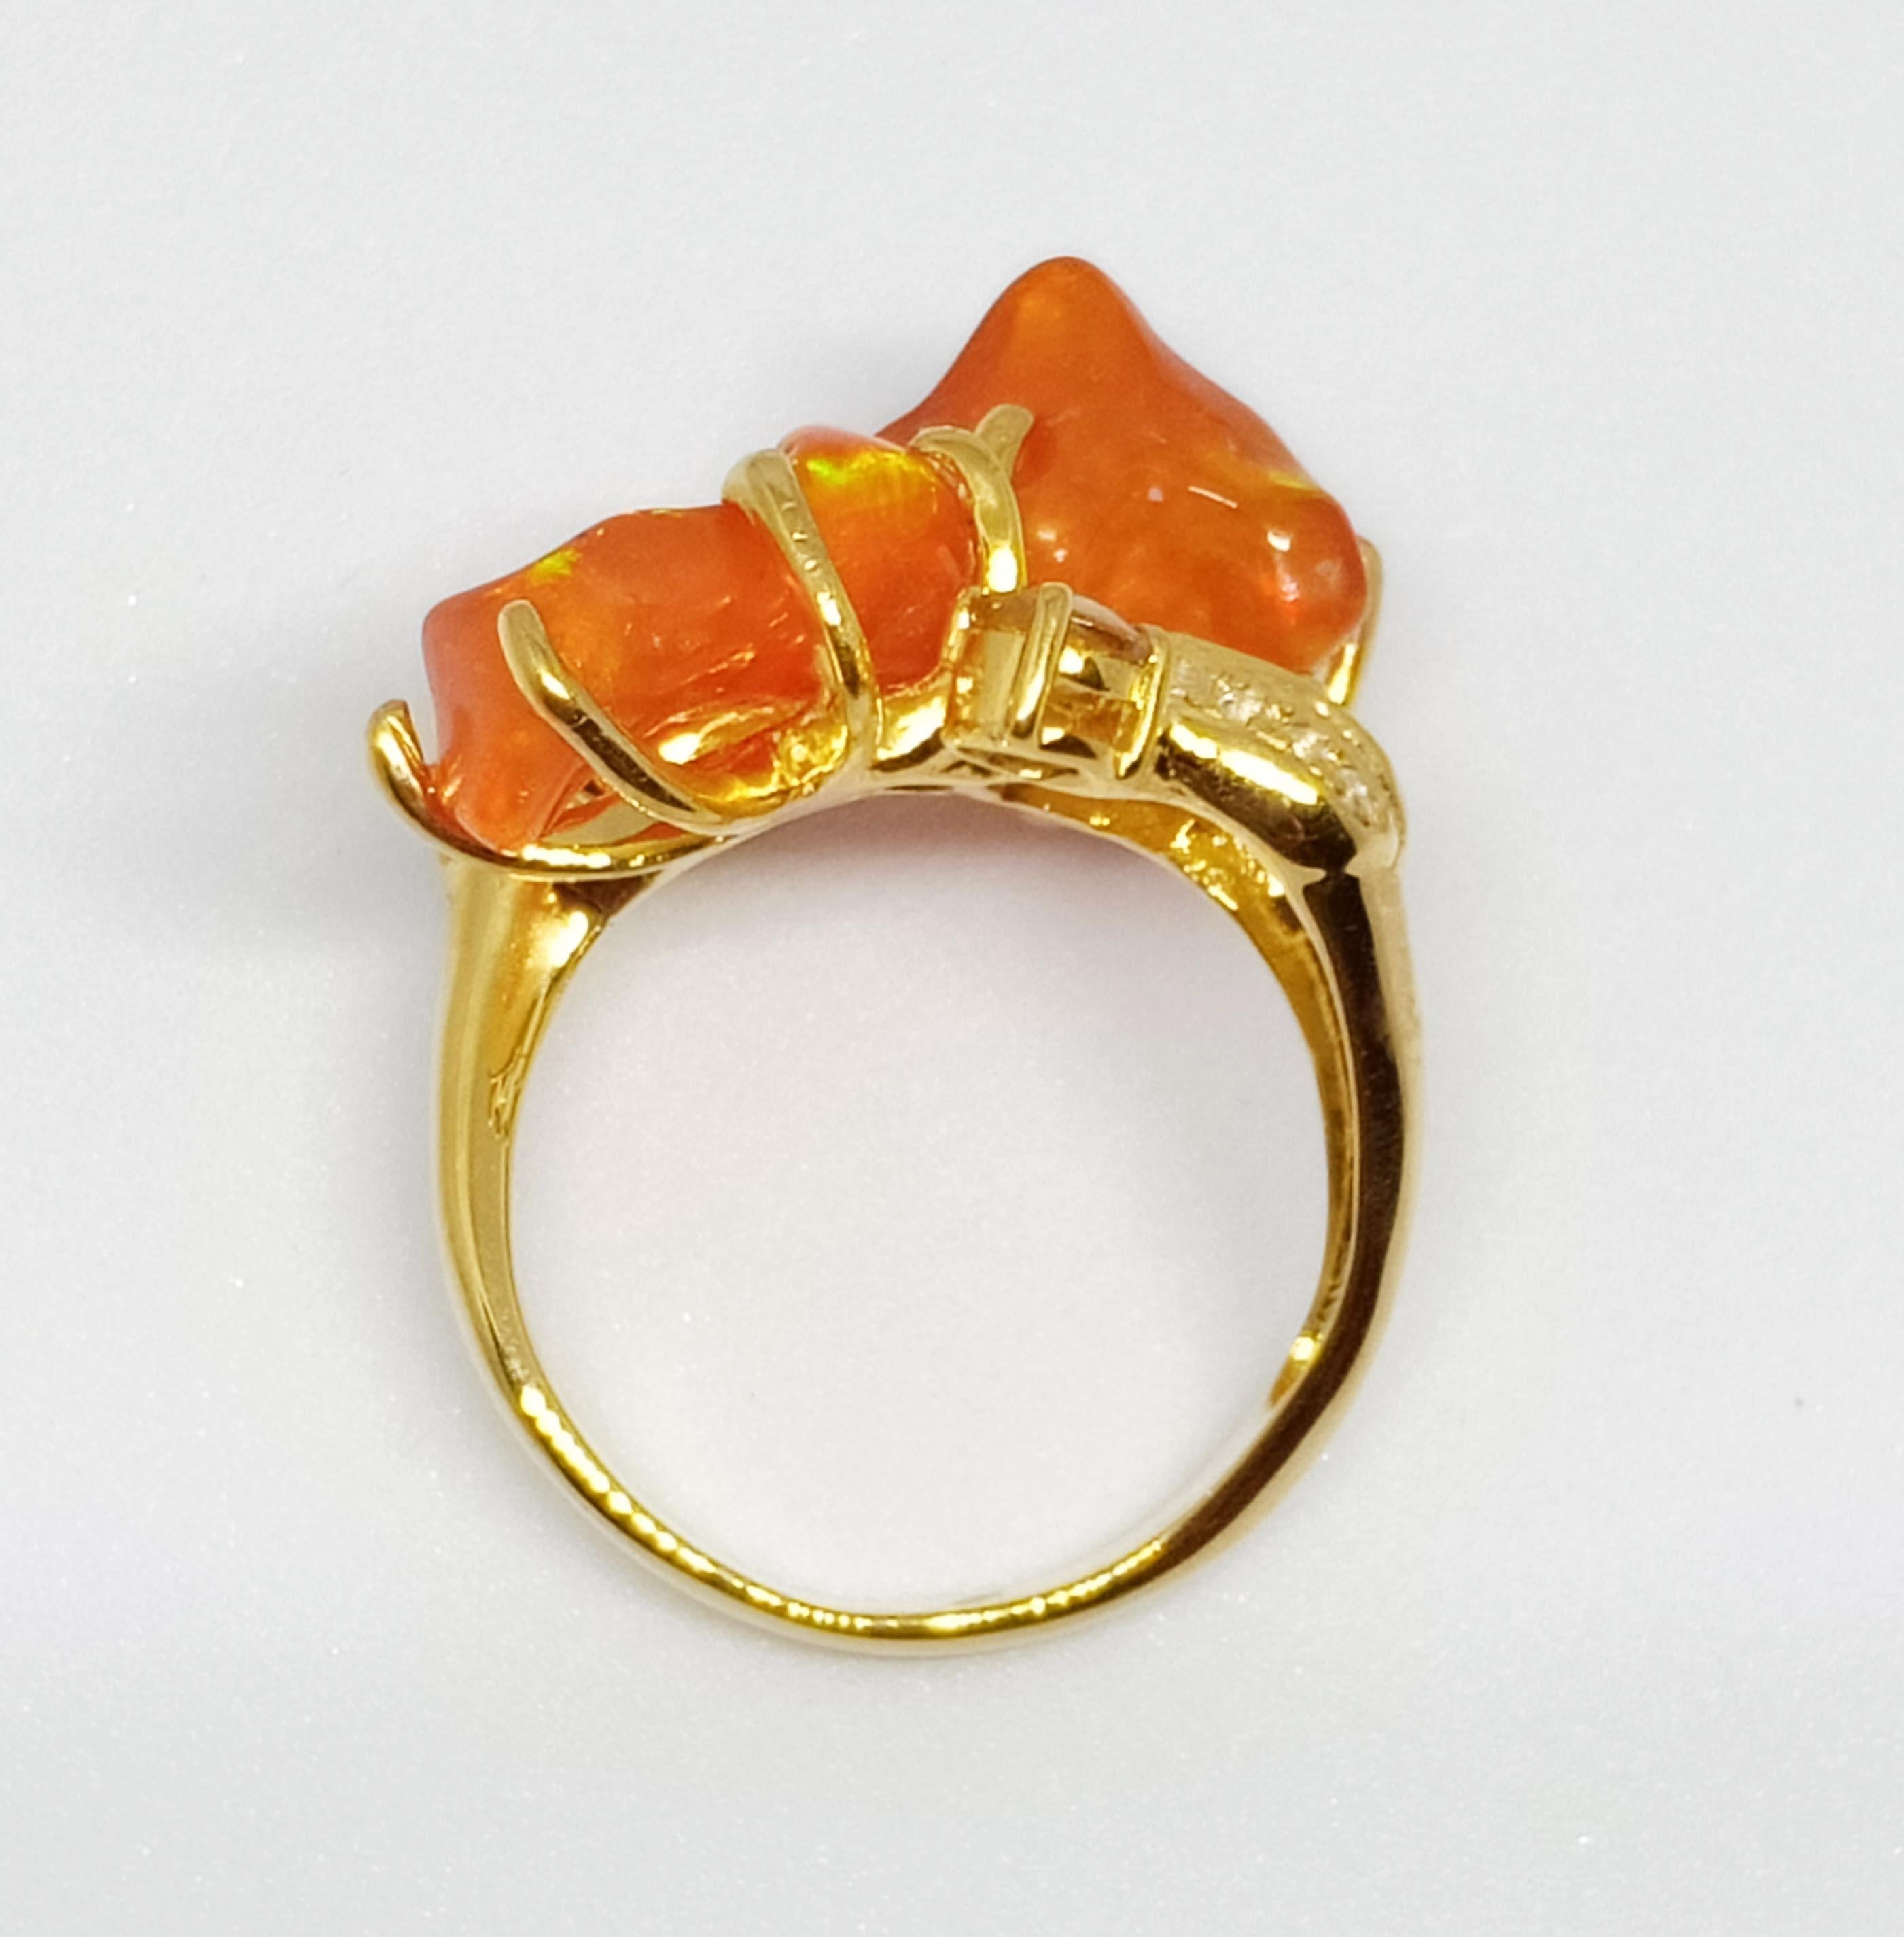 Orange Opal ring (Ethiopian) 18kgold plated over sterling silver 1